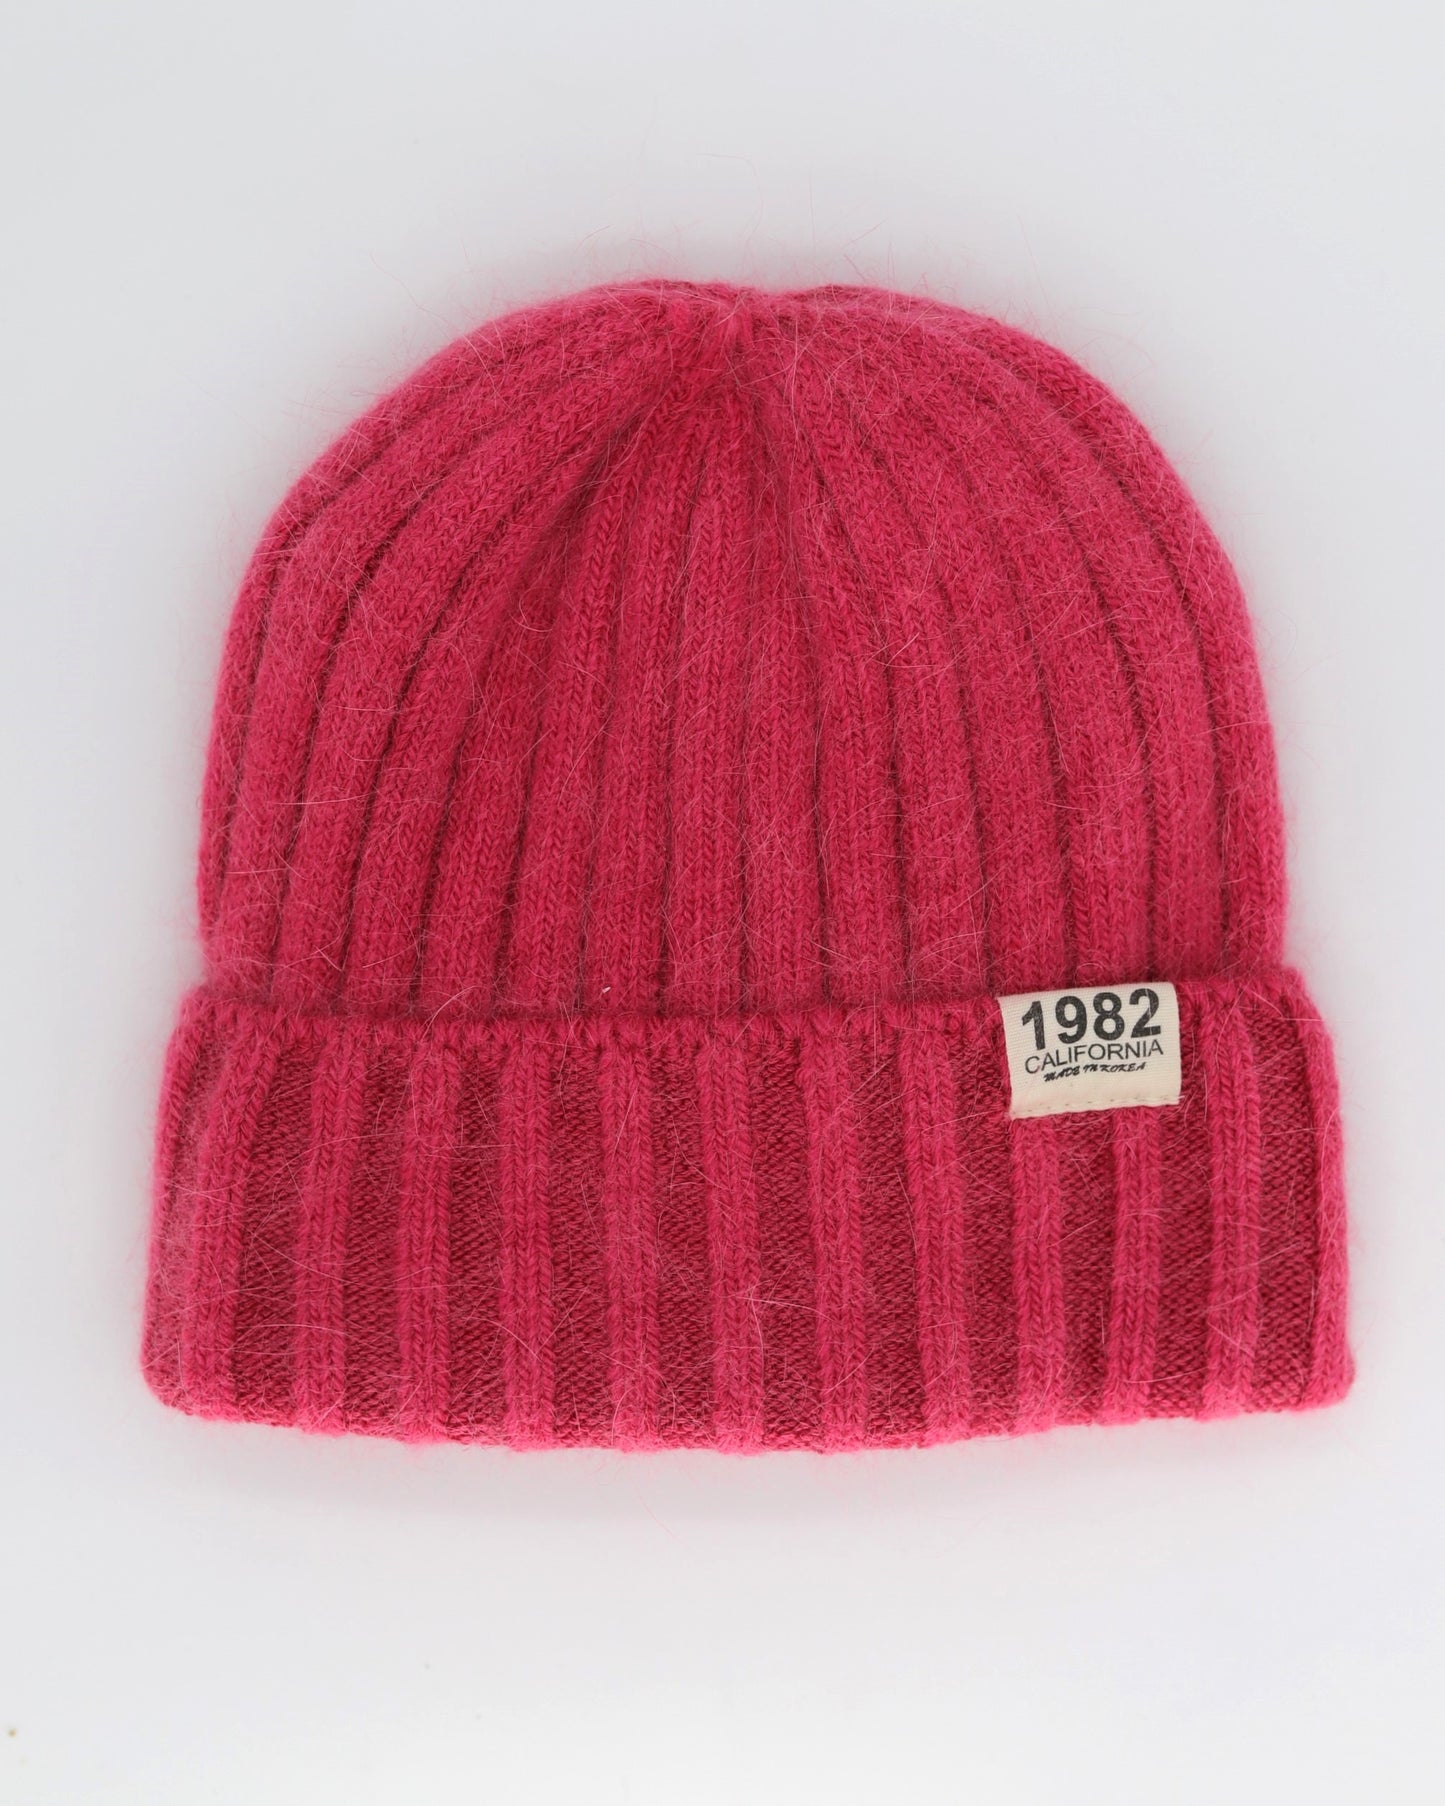 This Beanie is a finest hat with a classic silhouette from Villanella. A luxurious accessory for women made from the softest natural wool, cashmere and viscose for extreme comfort and warmth. It is made in a trendy raspberry pink color accompanied by an elegant pin. This product is sourced and manufactured in Poland.